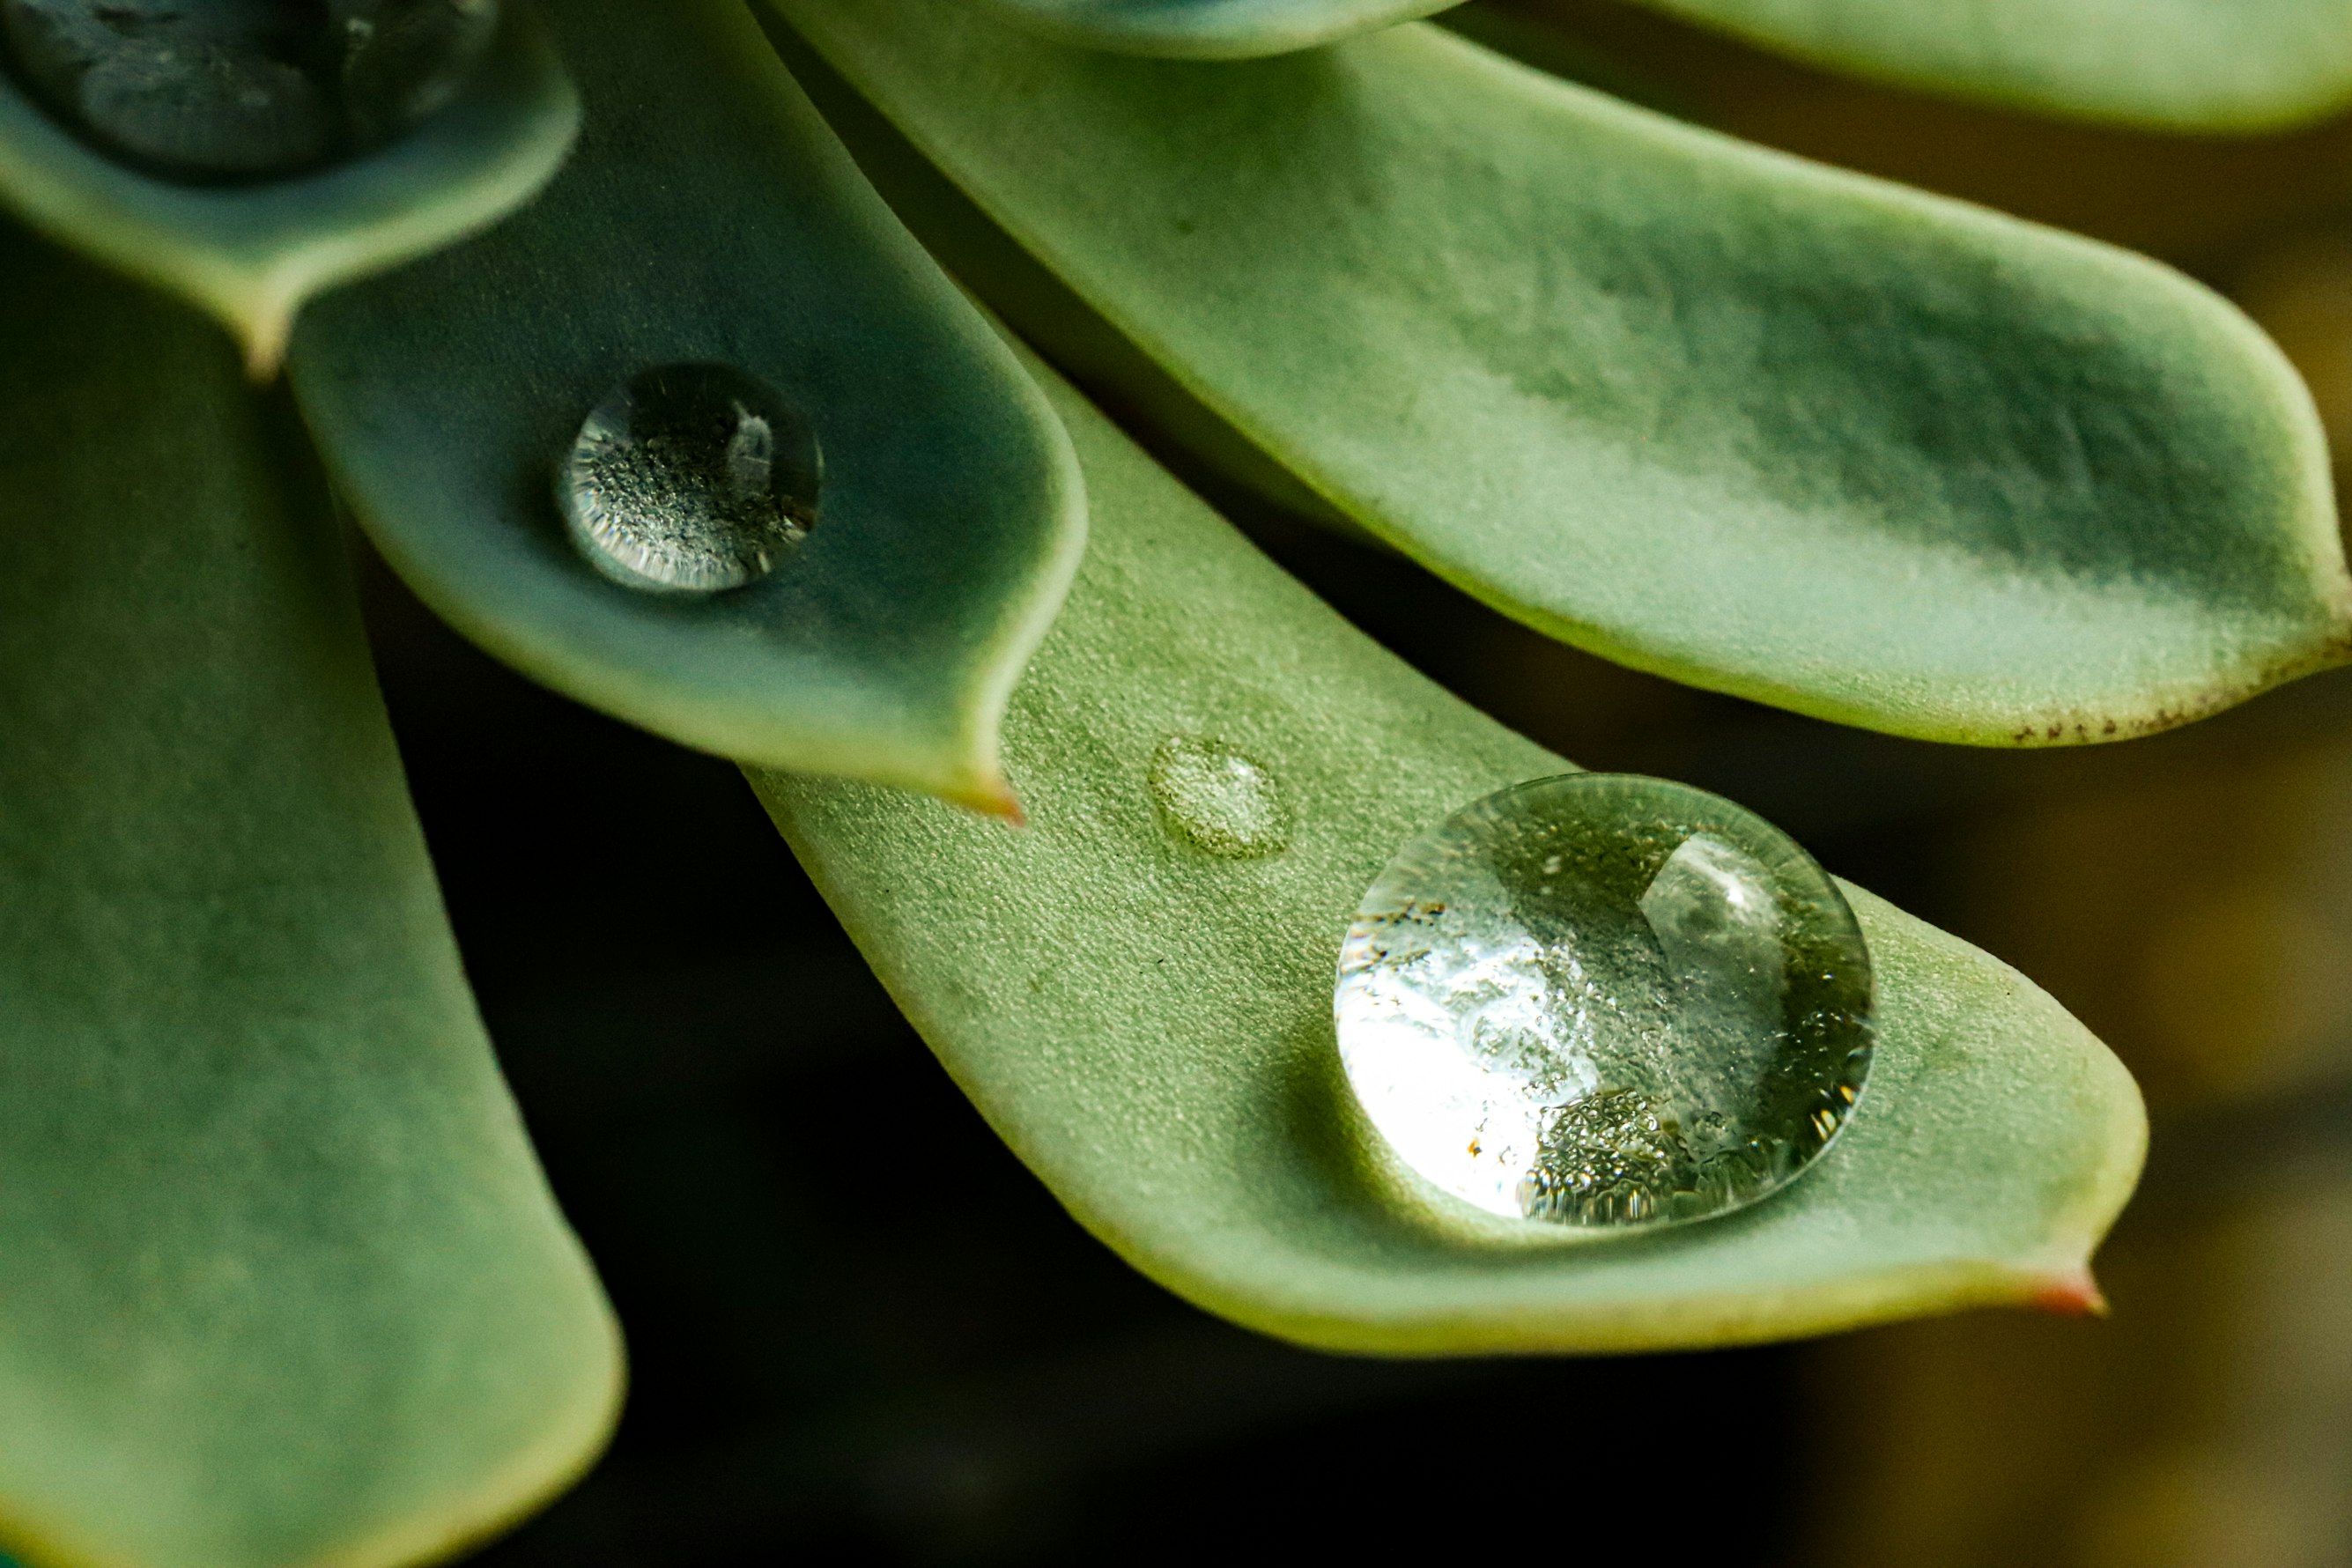 Water droplets on green leaves. Photo by Tahlia Doyle.